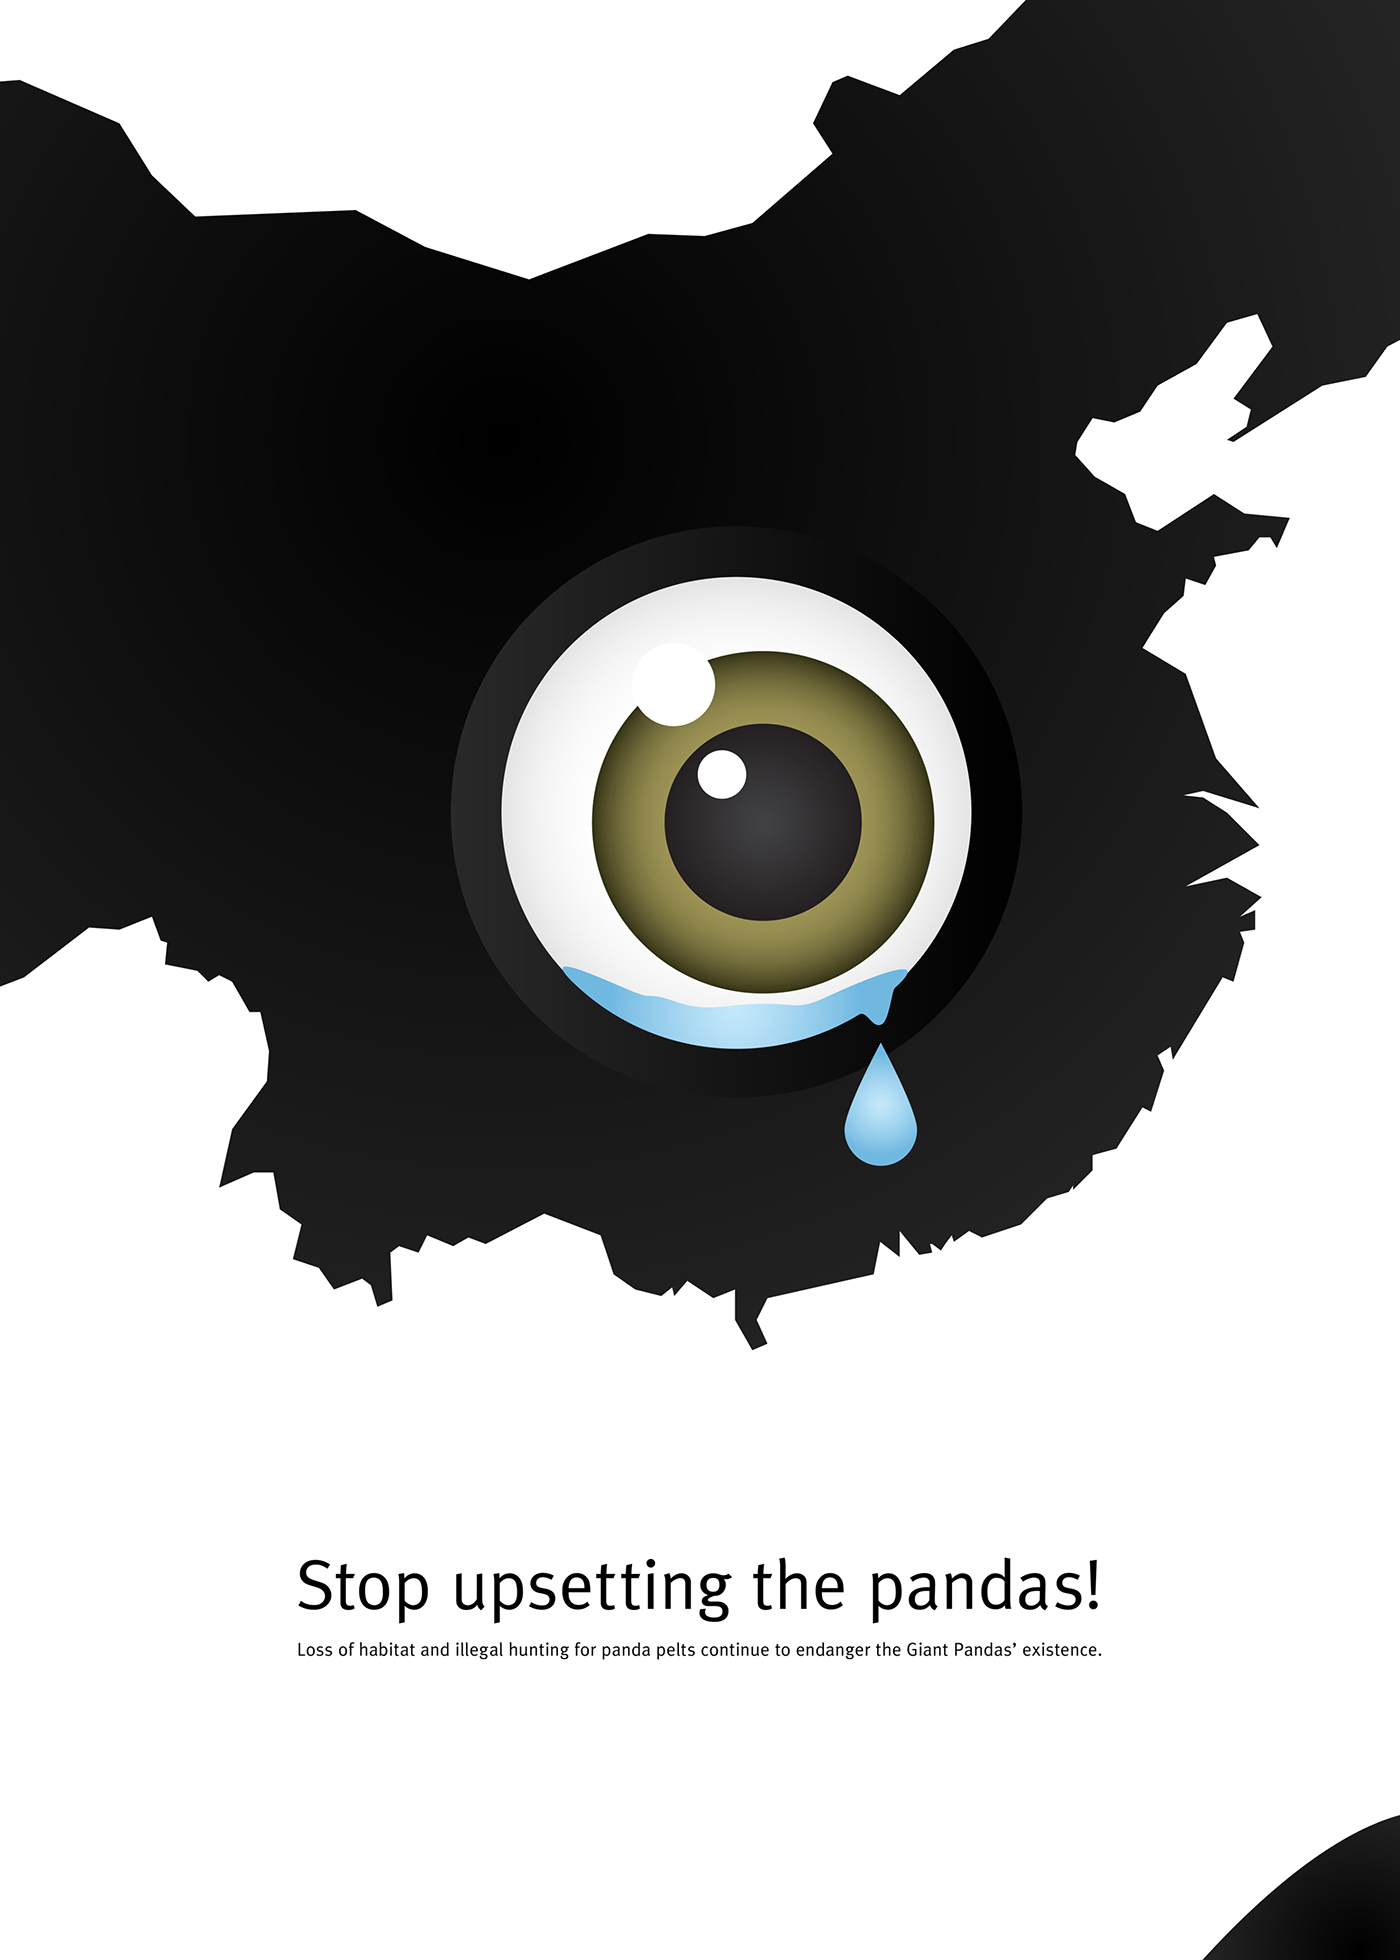 Good 50x70 social posters pandas Turtles  human Extinction conservation china social awareness Competition Protect endangered